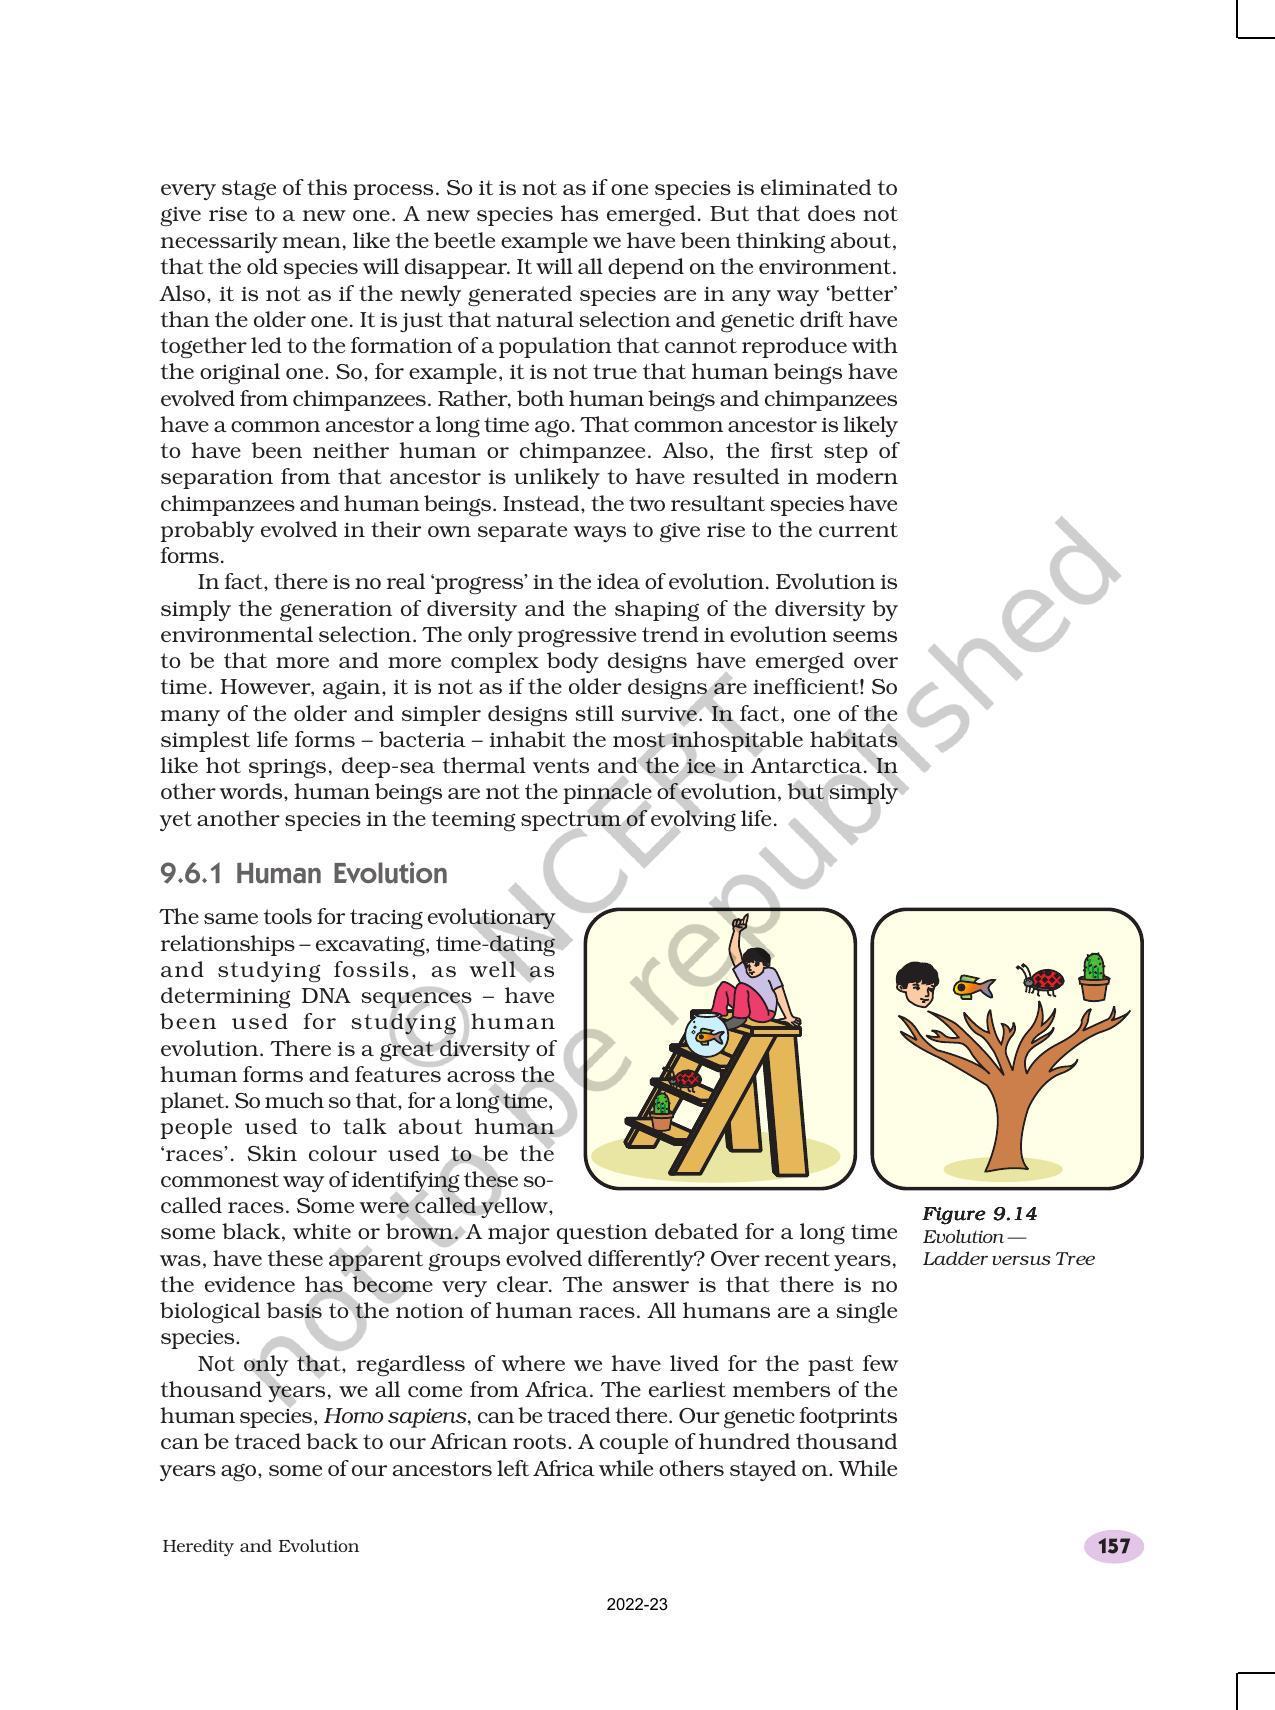 NCERT Book for Class 10 Science Chapter 9 Heredity and Evolution - Page 16